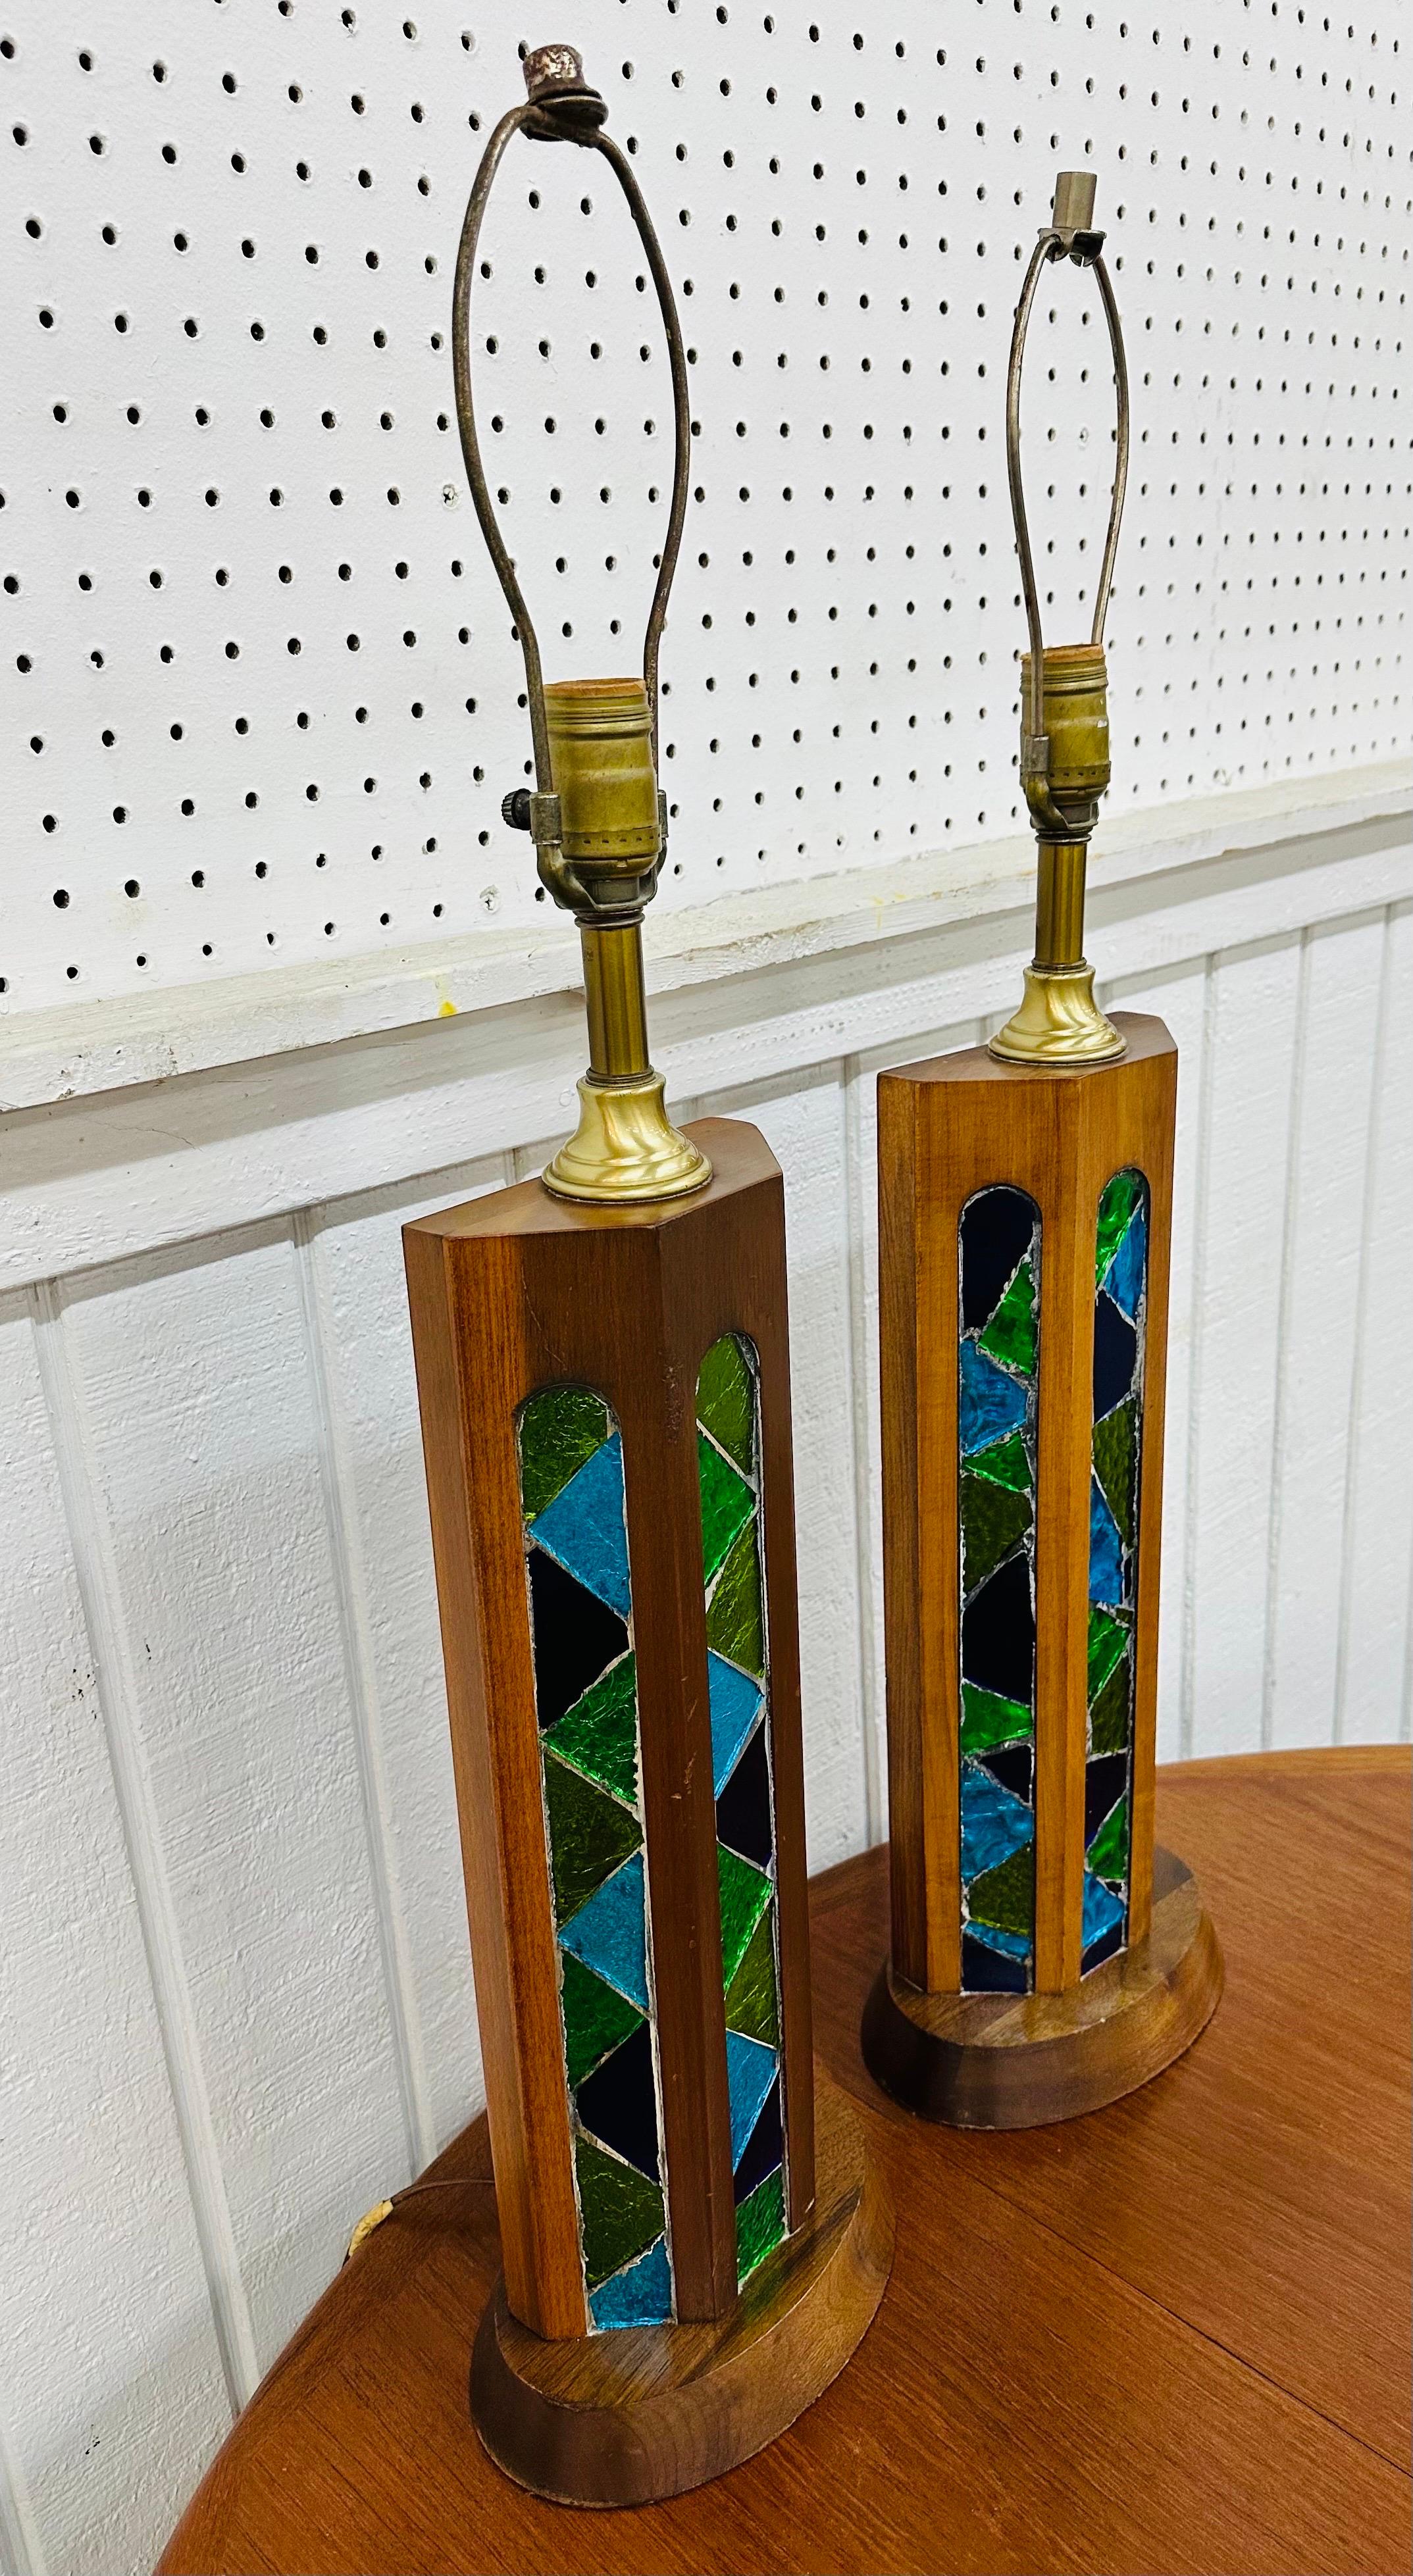 This listing is for a pair of Mid-Century Modern Walnut Stained Glass Table Lamps. Featuring a walnut base, beautiful stained glass accents, brass parts, and original cords. This is an exceptional combination of quality and design in the style of